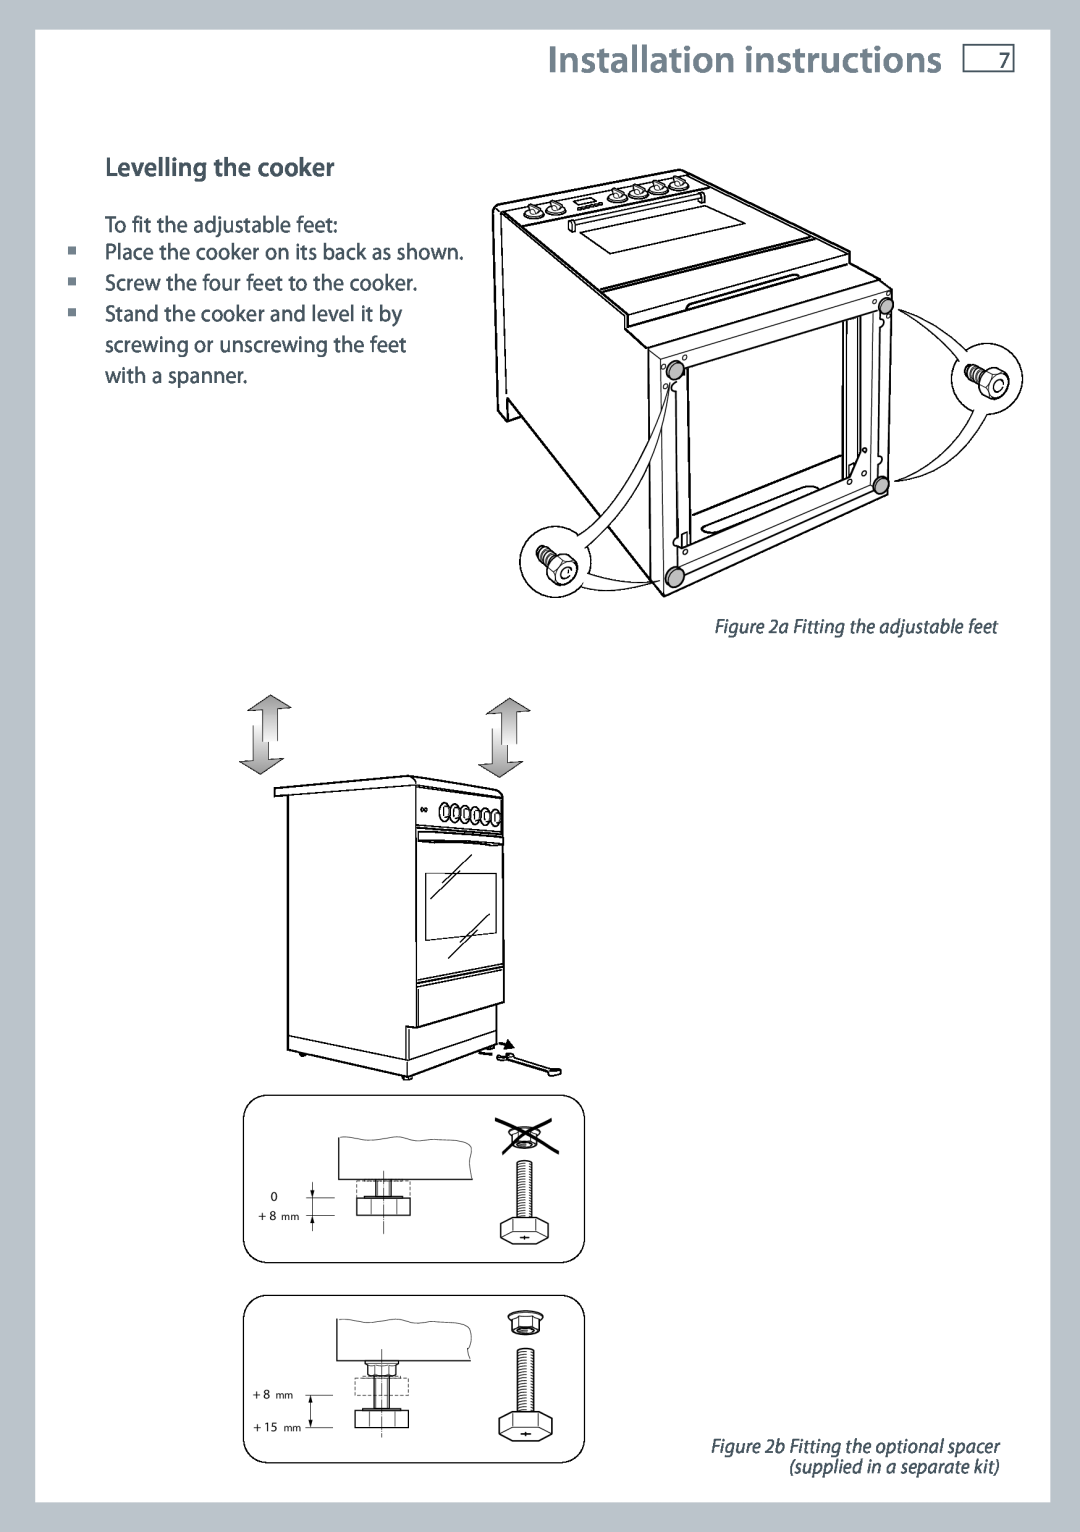 Fisher & Paykel OR60 Levelling the cooker, Installation instructions, a Fitting the adjustable feet, + 8 mm + 8 mm + 15 mm 